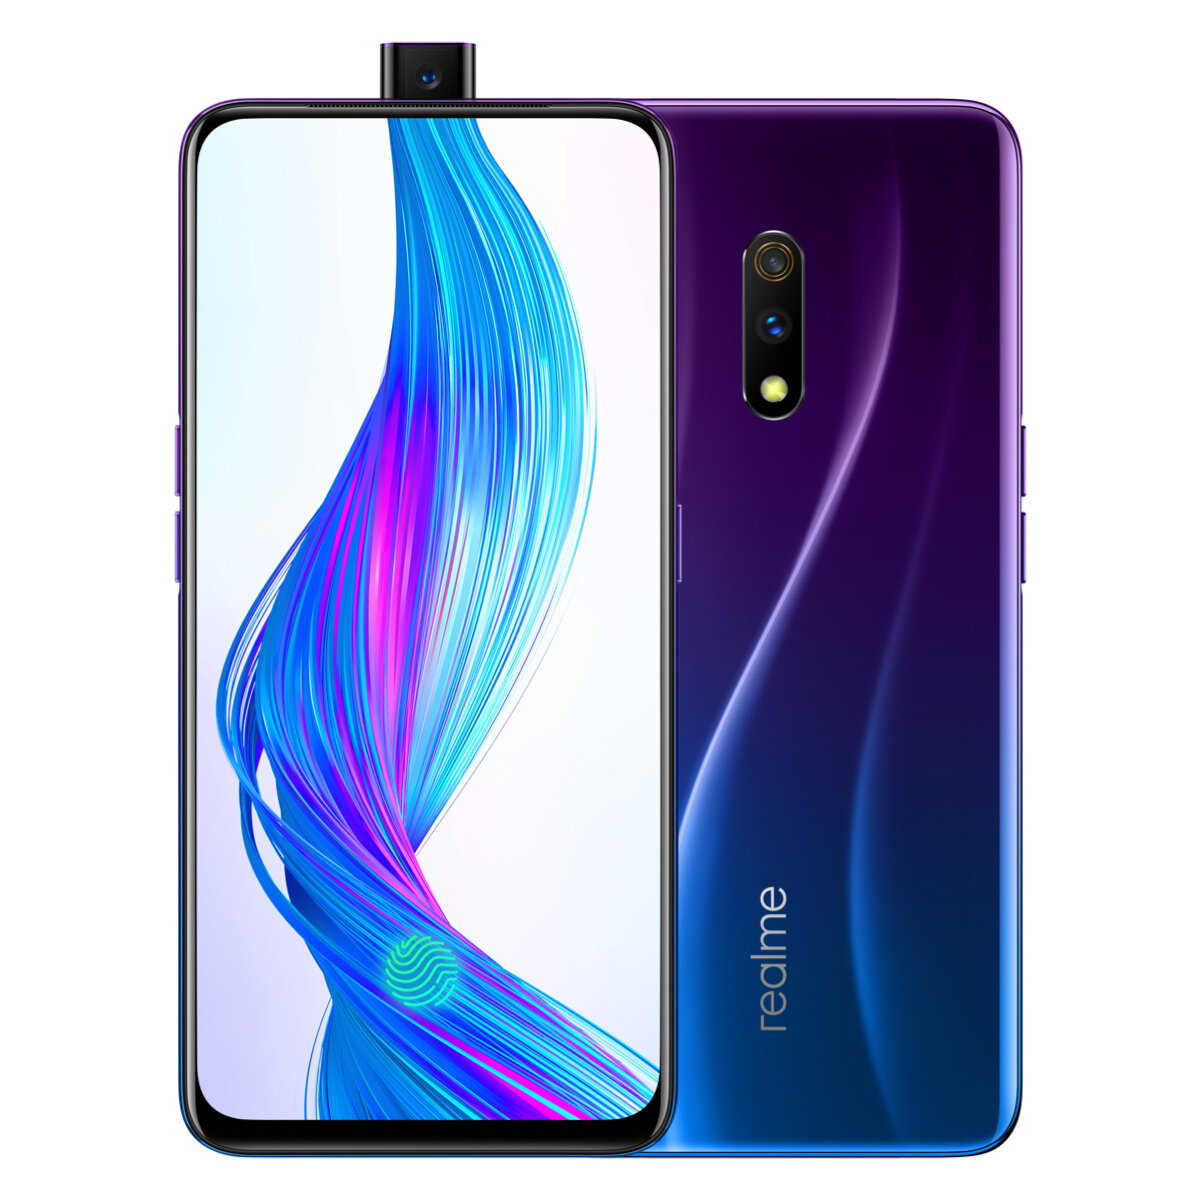 £300.94 17% OPPO Realme X 6.53 Inch FHD+ AMOLED 3765mAh 8GB RAM 128GB ROM Snapdragon 710 Octa Core 2.2GHz 4G Smartphone Smartphones from Mobile Phones & Accessories on banggood.com